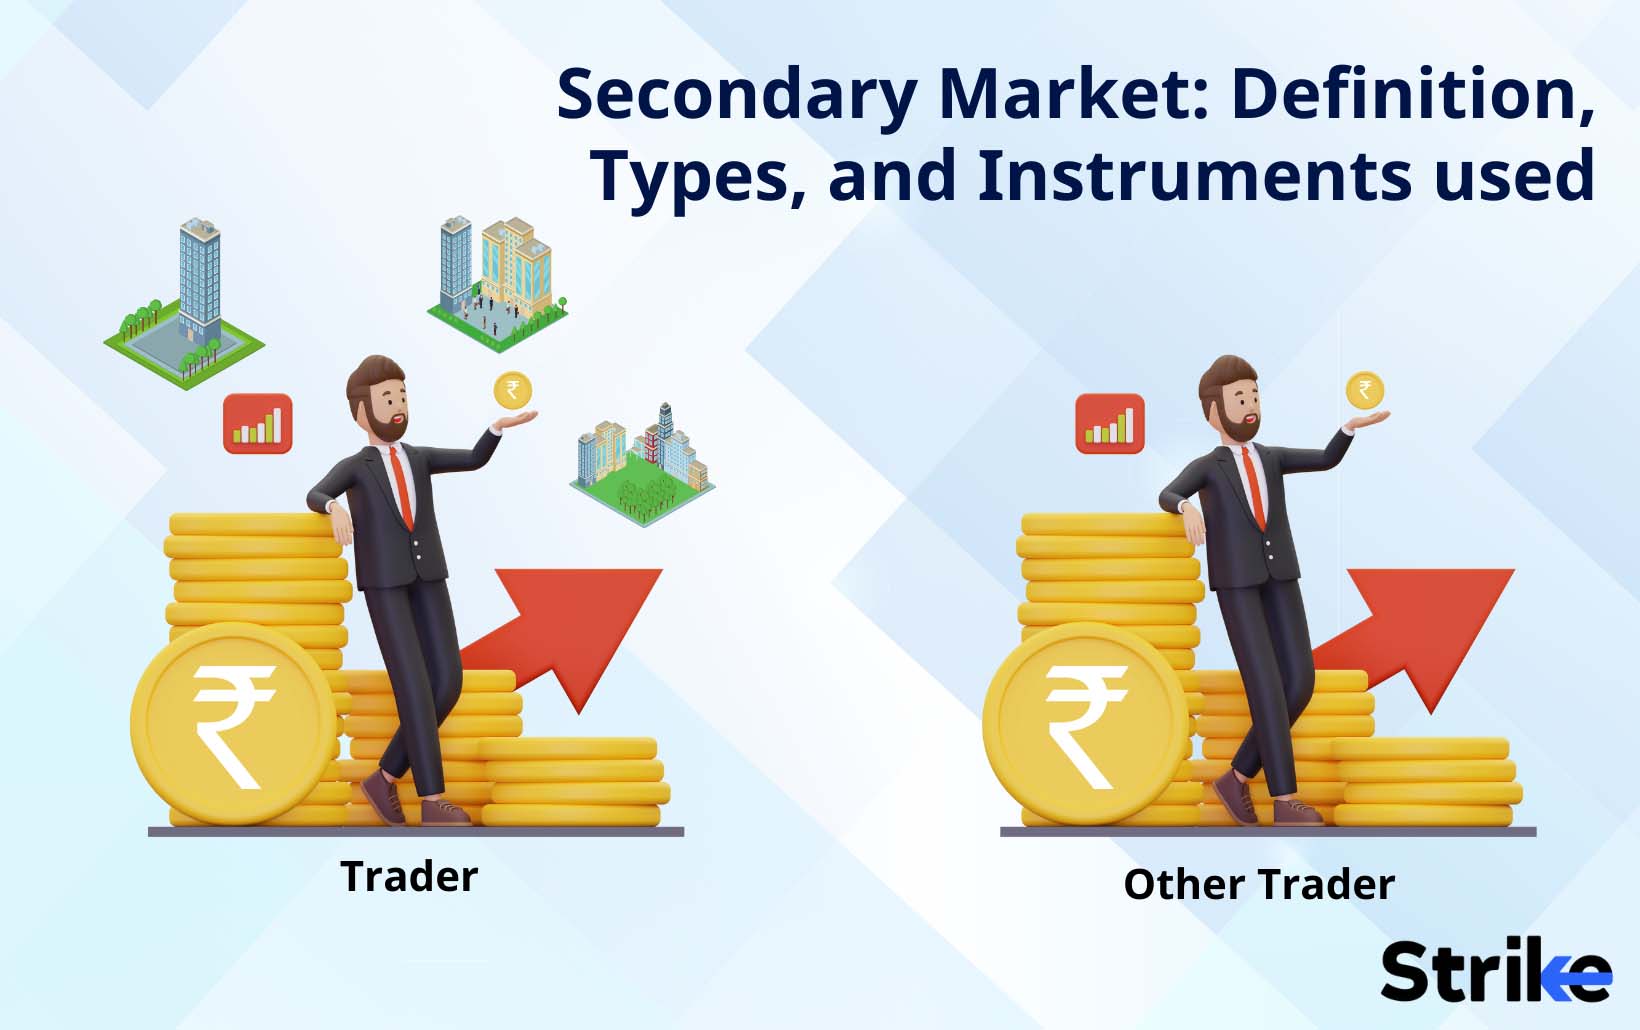 Secondary Market: Definition, Types, and Instruments Used